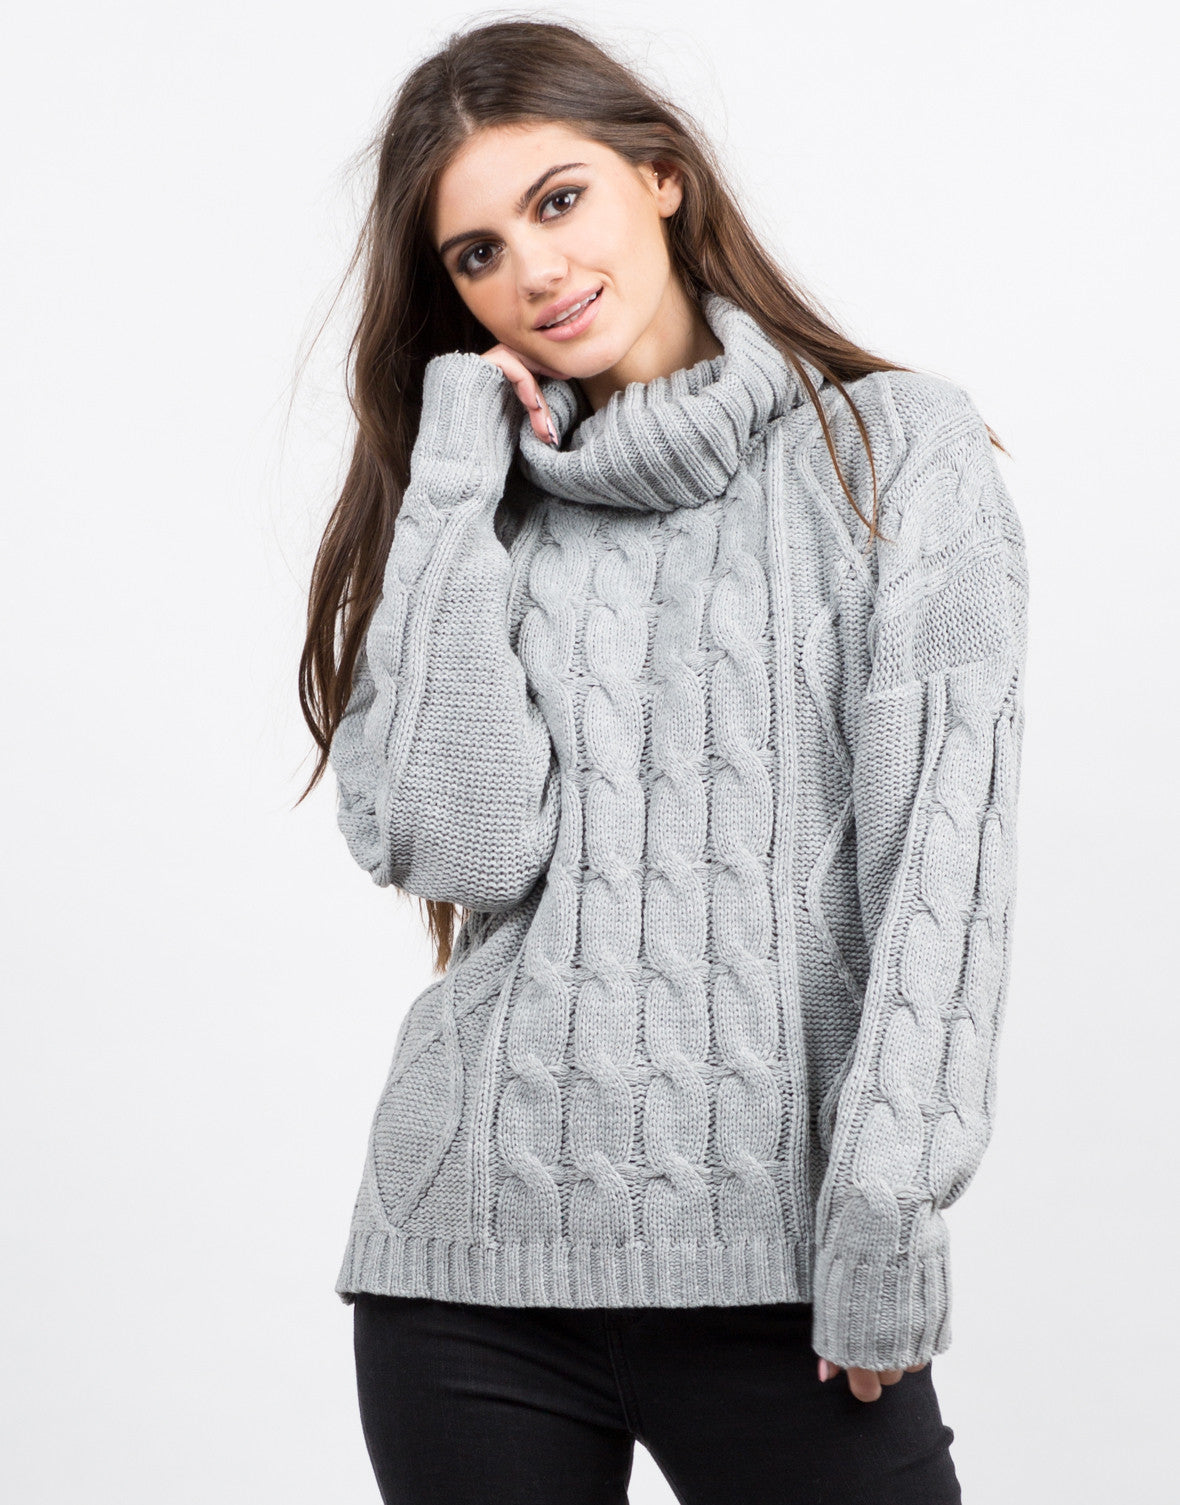 Turtleneck Chunky Knit Sweater - Cowl Neck Sweater - Thick Knit Top